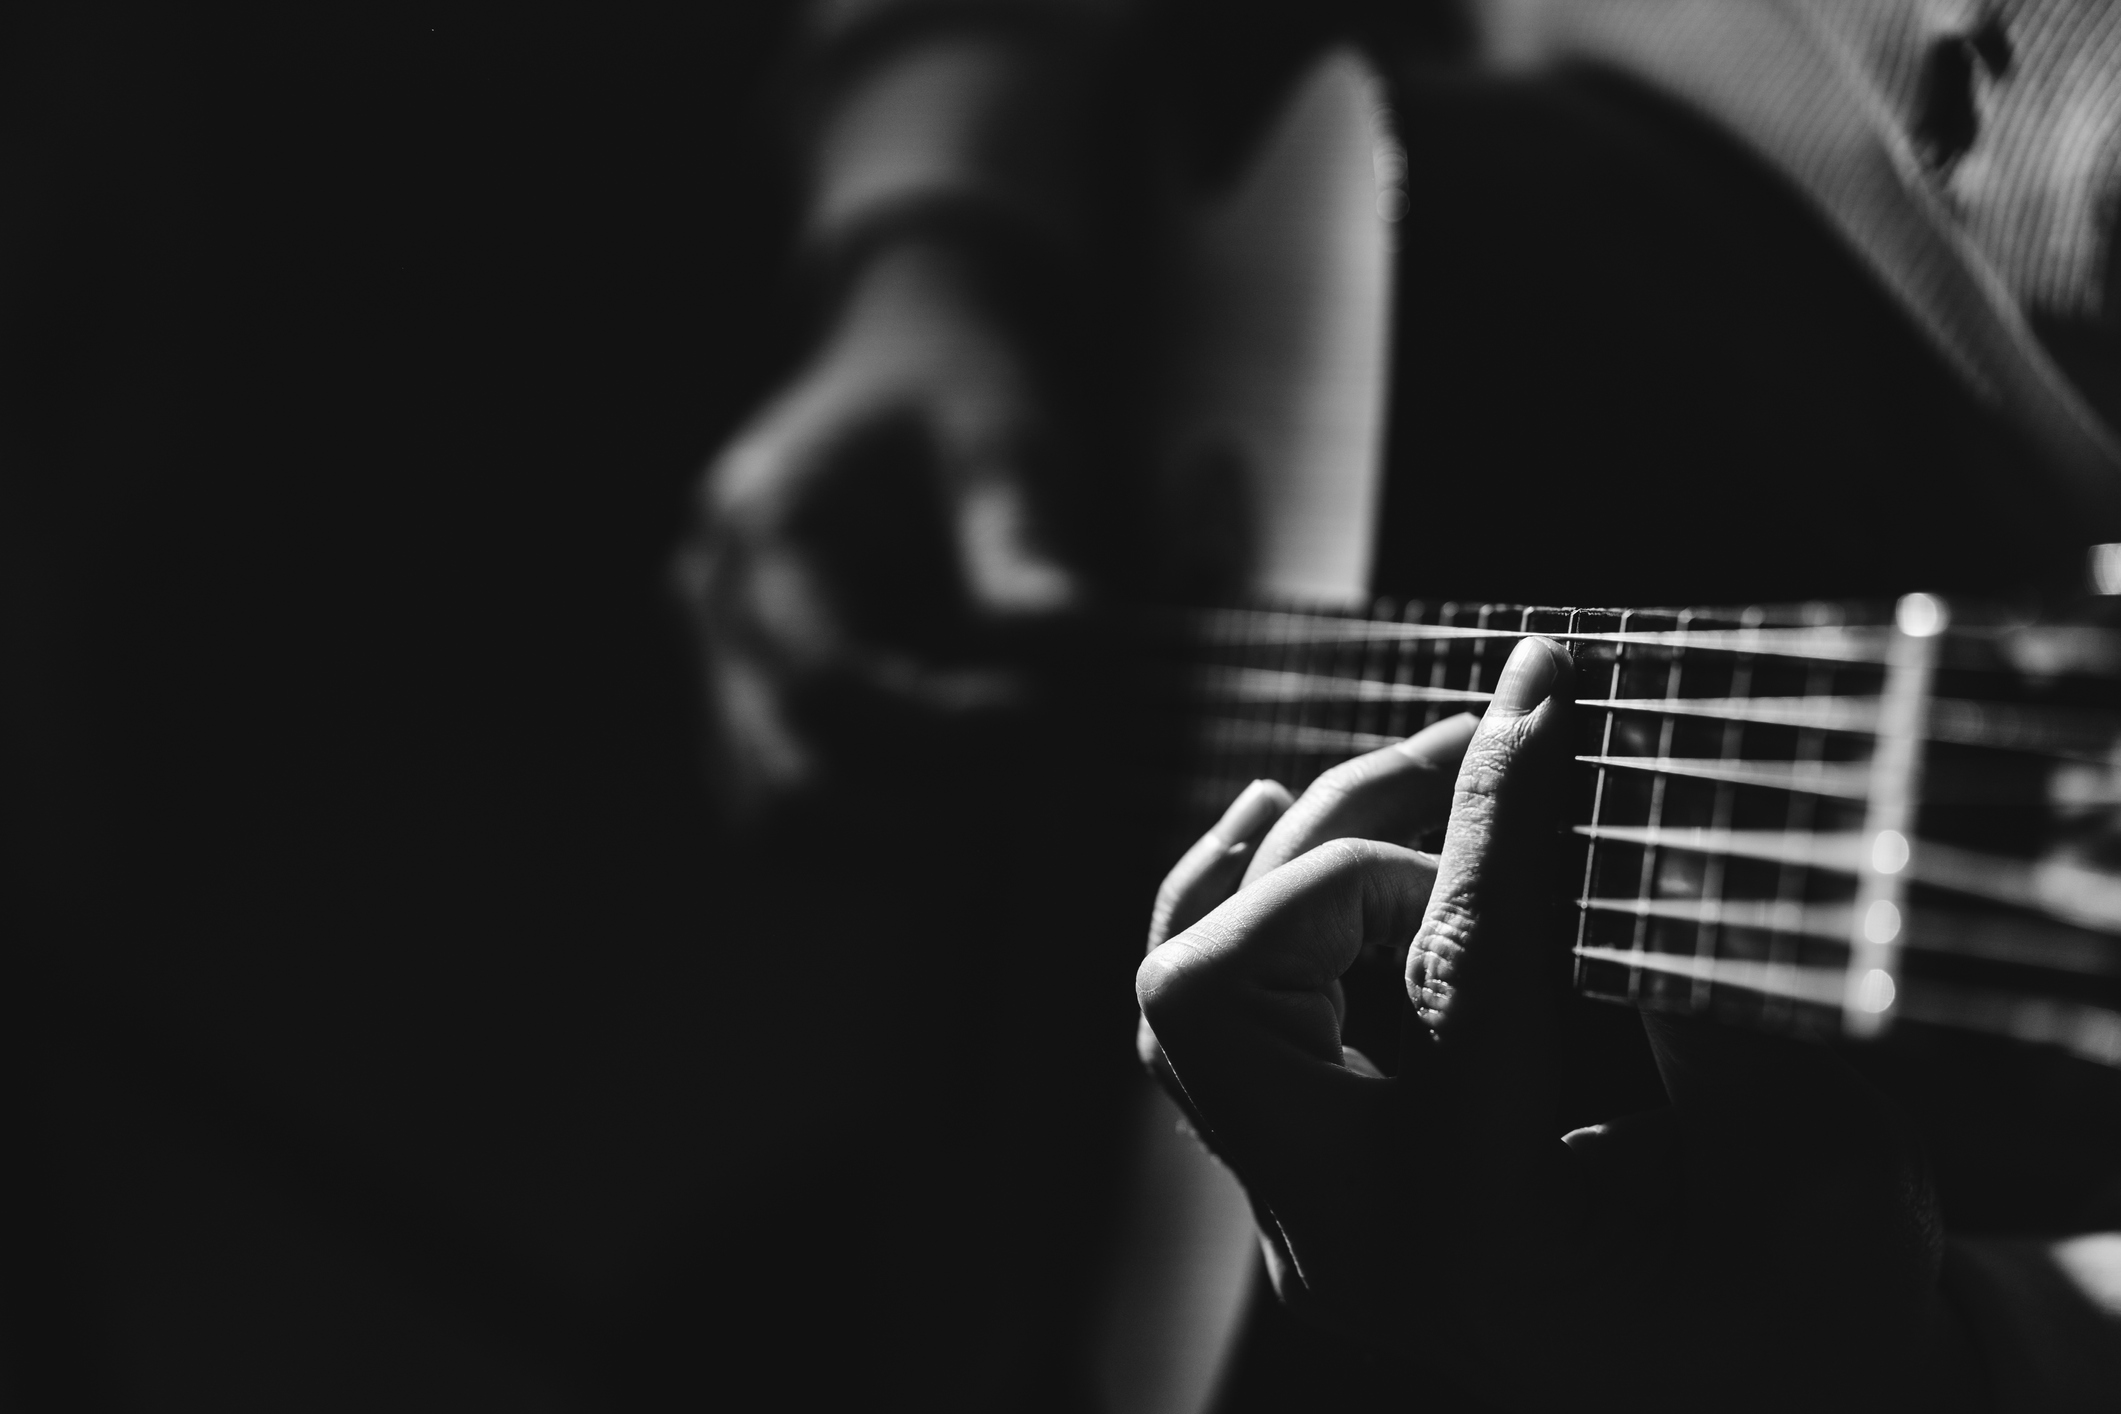 Guitar held by Toby Kieth in black and white